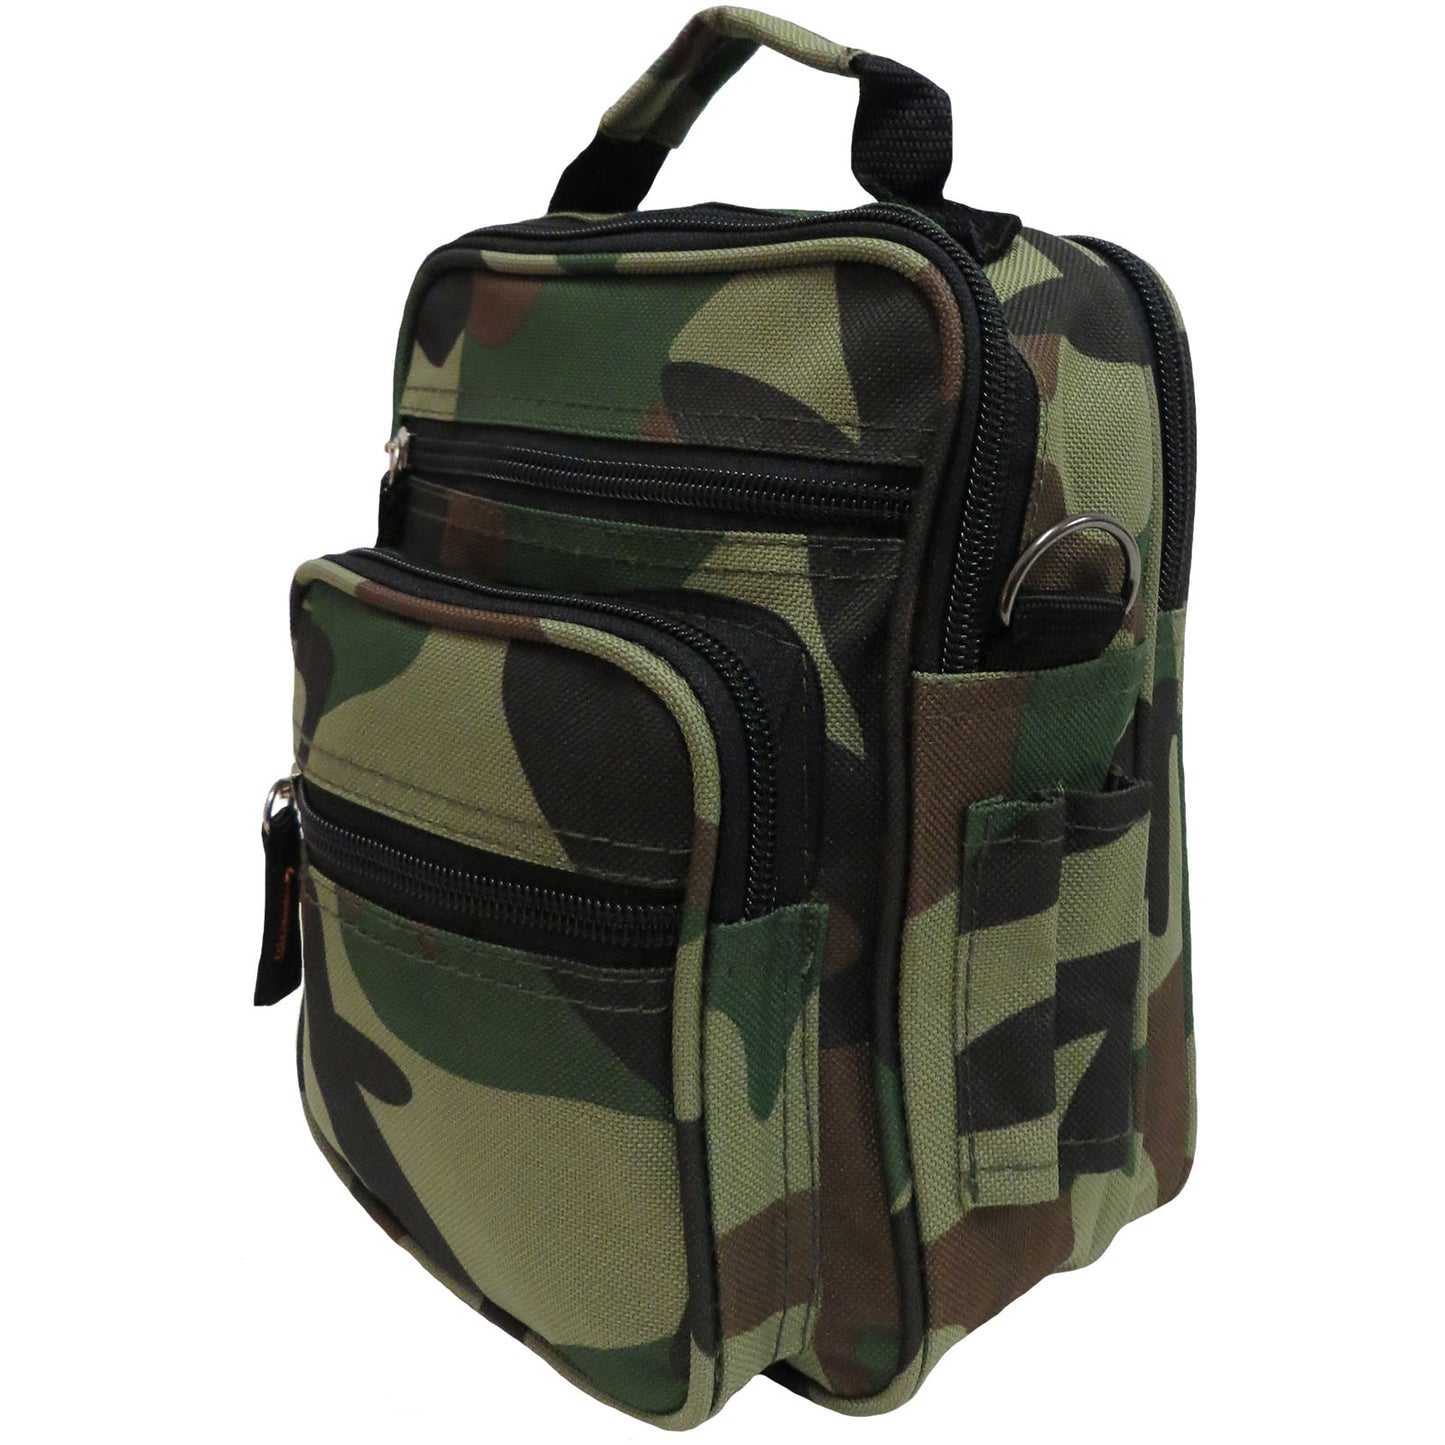 Camouflage messenger bag in a popular camo print design with a carry handle